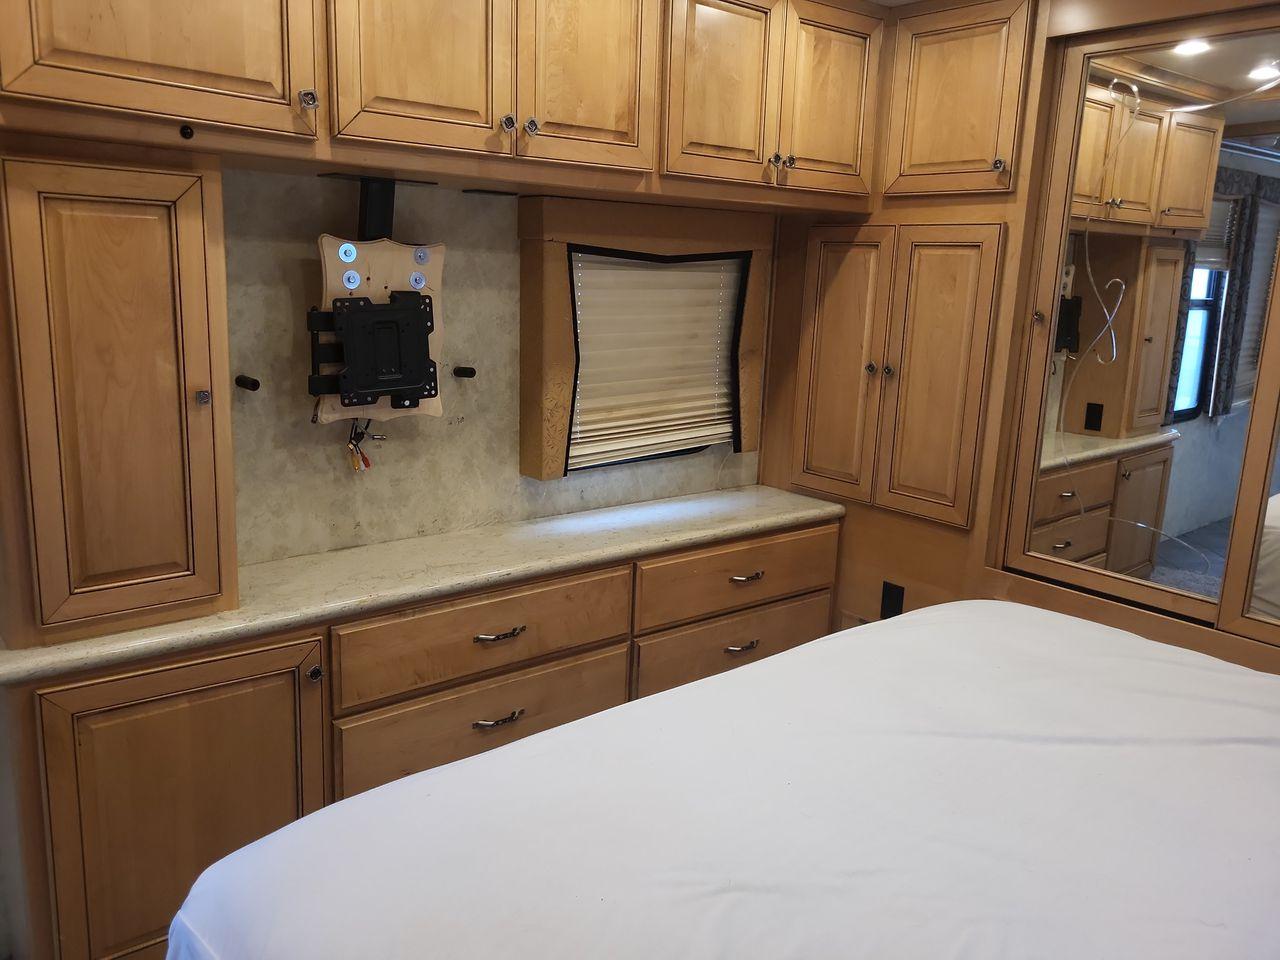 2009 WHITE AMERICAN COACH ALLEGIANCE 40X (4VZBR1D9X9C) , Length: 40.96 ft. | Gross Weight: 34,600 lbs. | Slides: 3 transmission, located at 4319 N Main St, Cleburne, TX, 76033, (817) 678-5133, 32.385960, -97.391212 - Photo #19